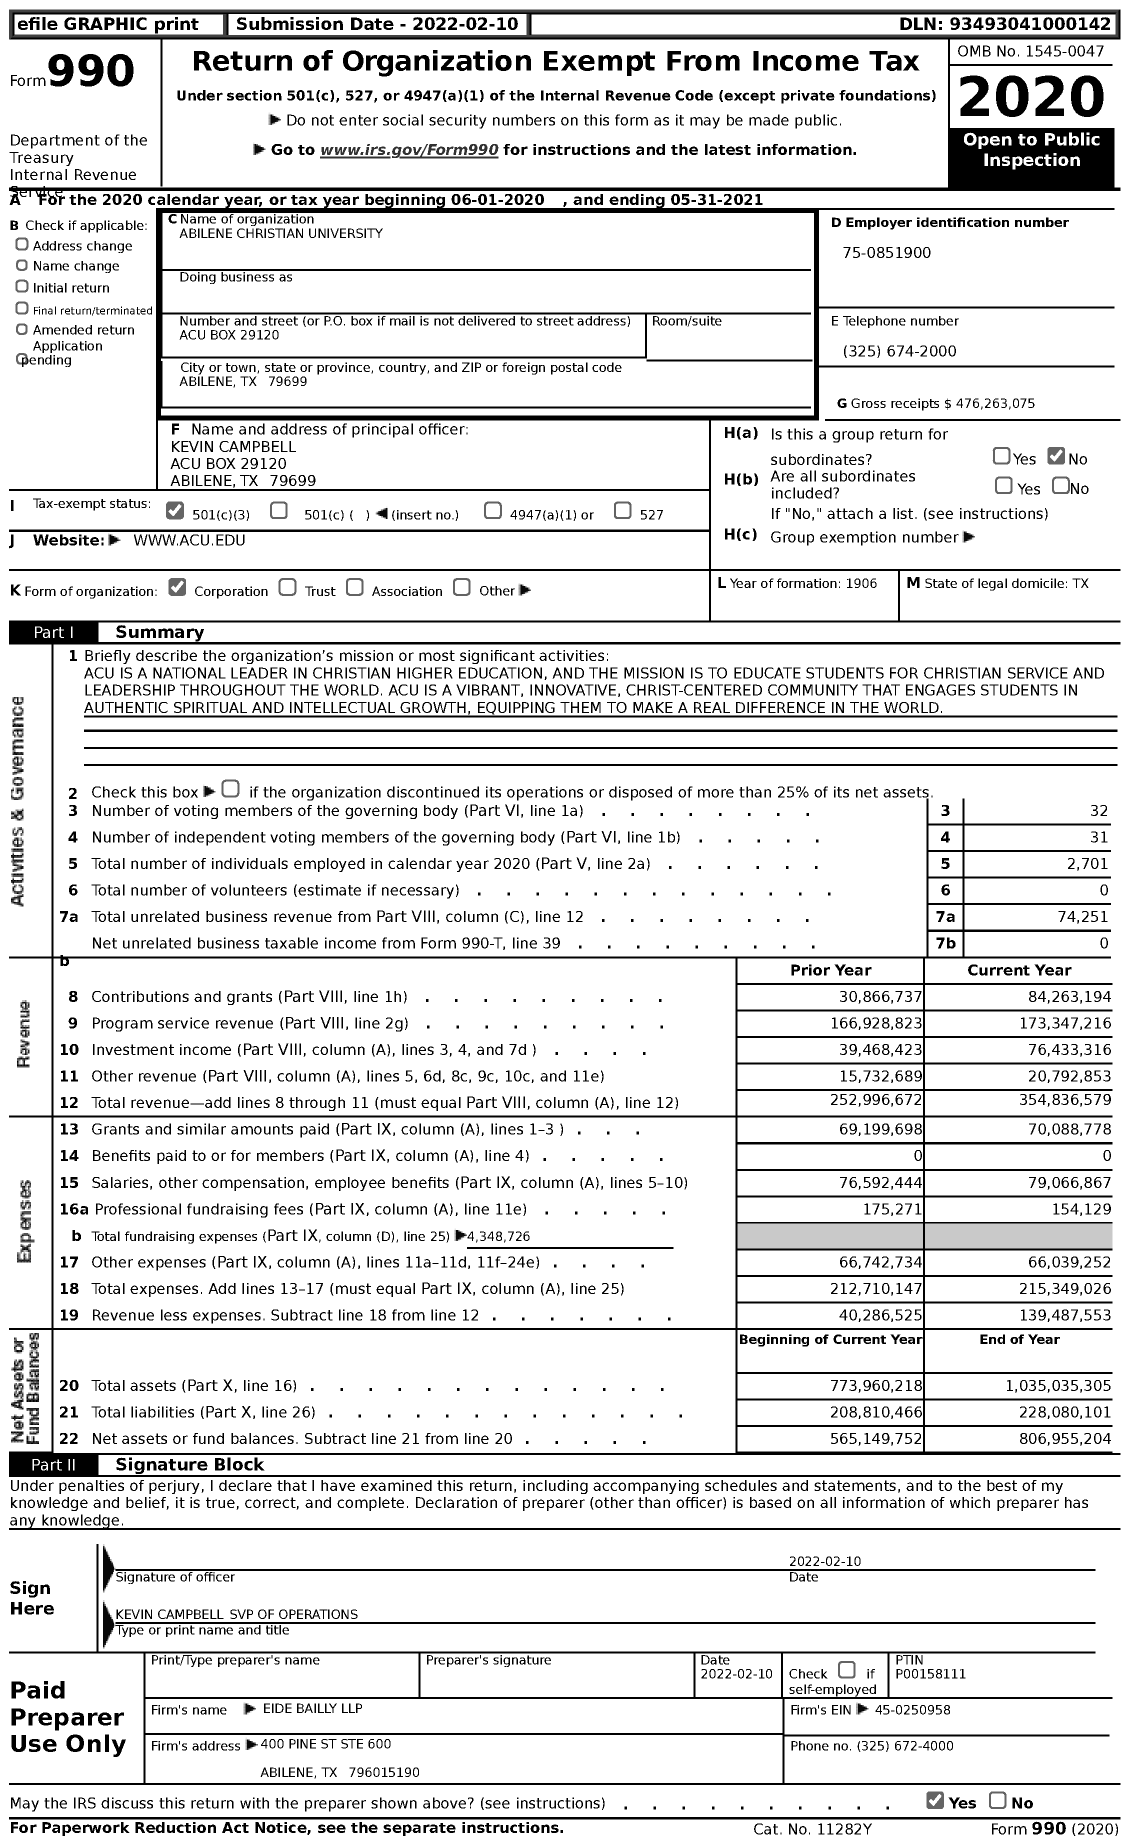 Image of first page of 2020 Form 990 for Abilene Christian University (ACU)